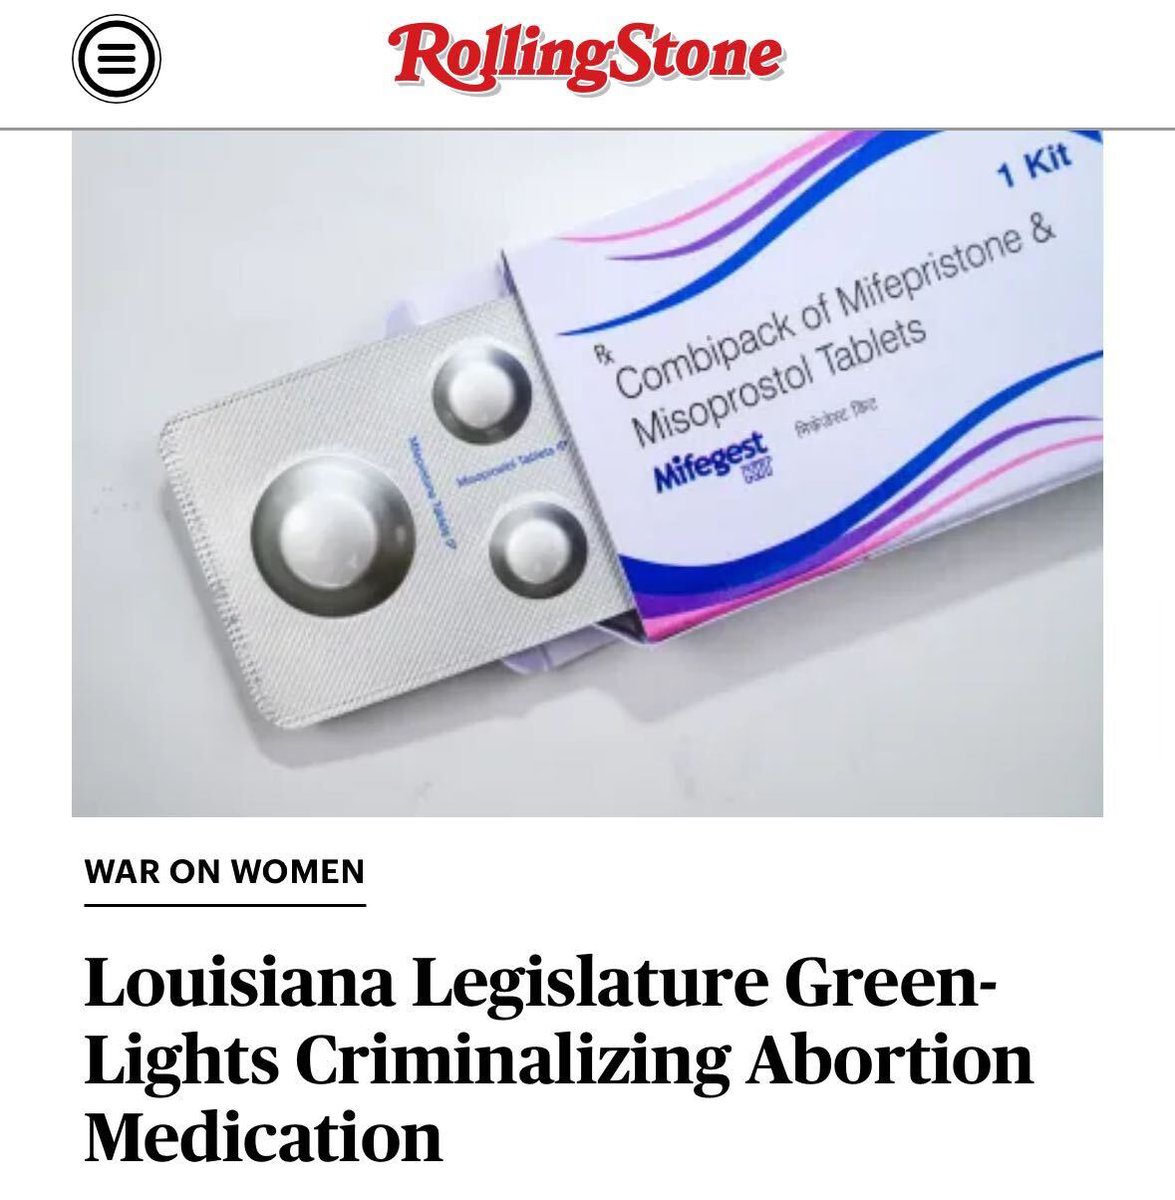 Louisiana is poised to legally reclassify abortion care medication as a dangerous controlled substance punishable with jail time if obtained without a prescription. Story: rollingstone.com/politics/polit…